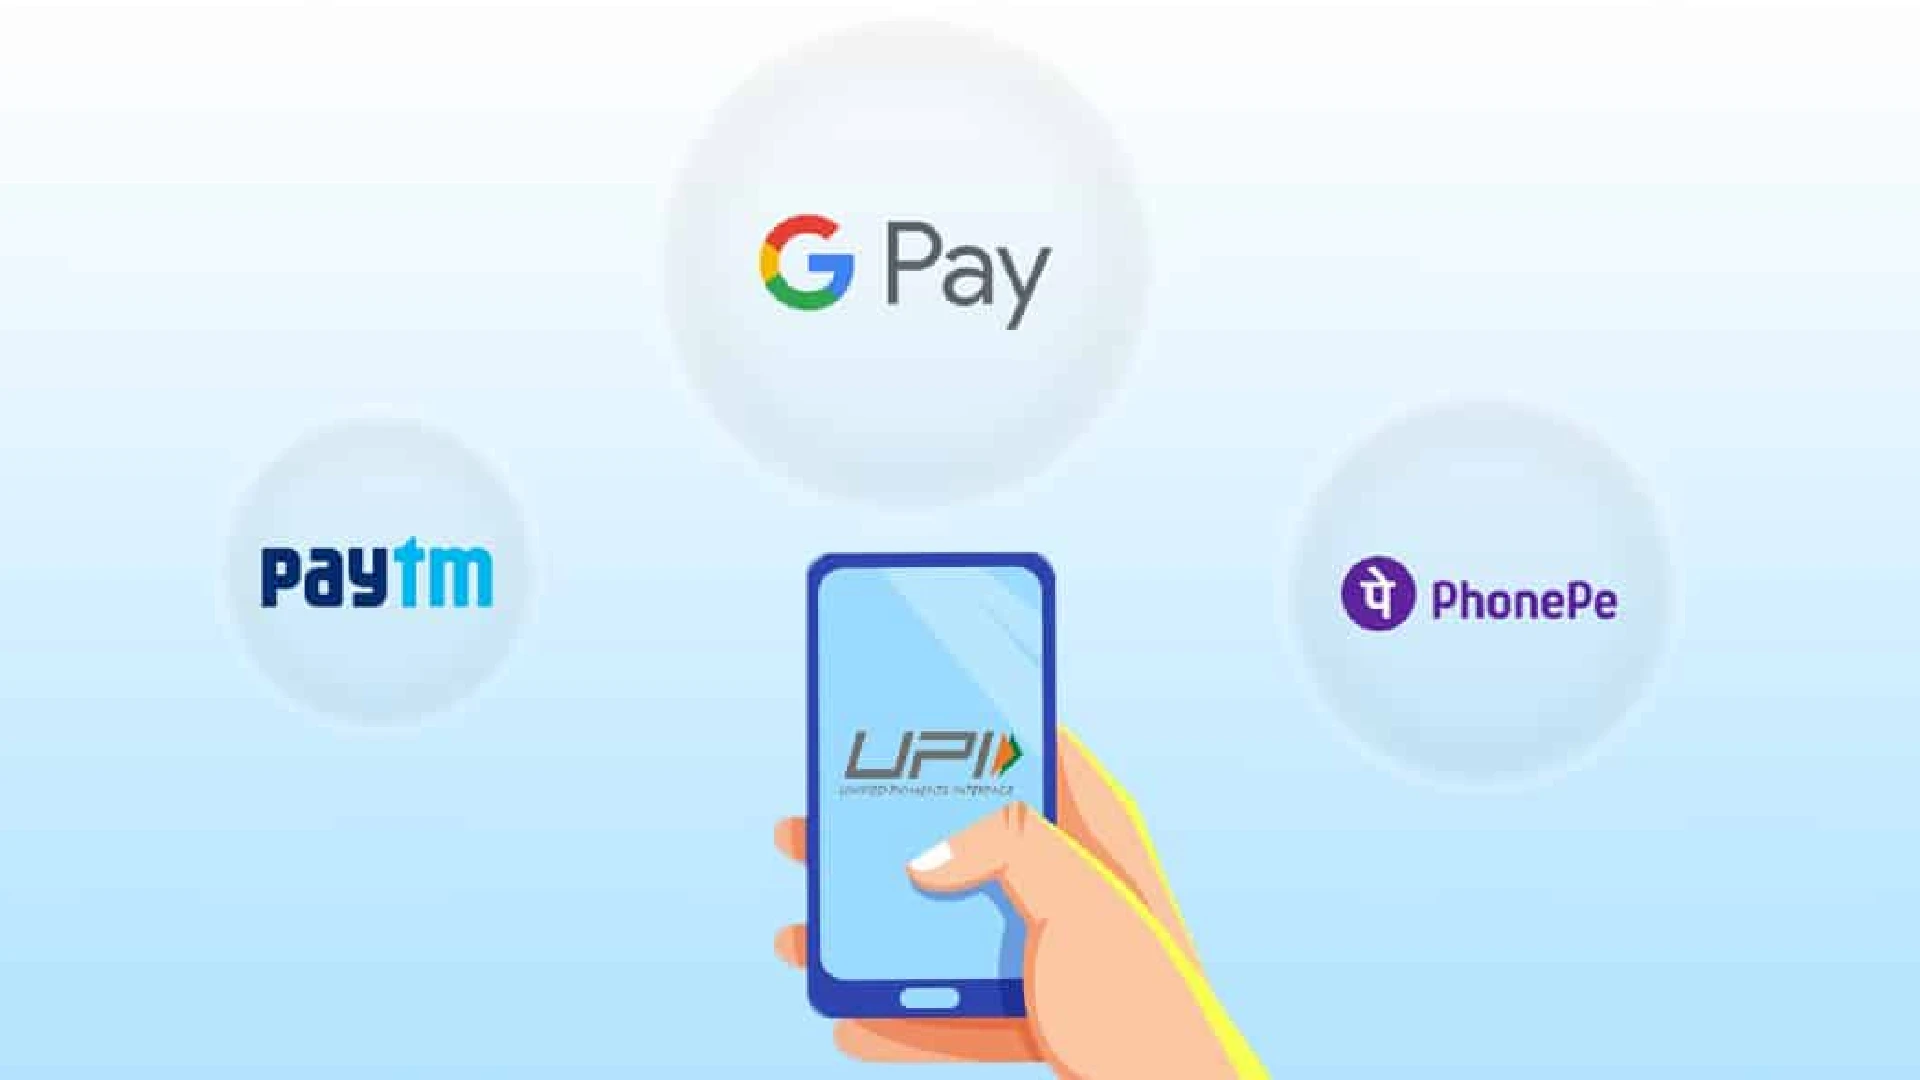 Paytm vs PhonePe vs Google Pay: Which is India’s best payment app?